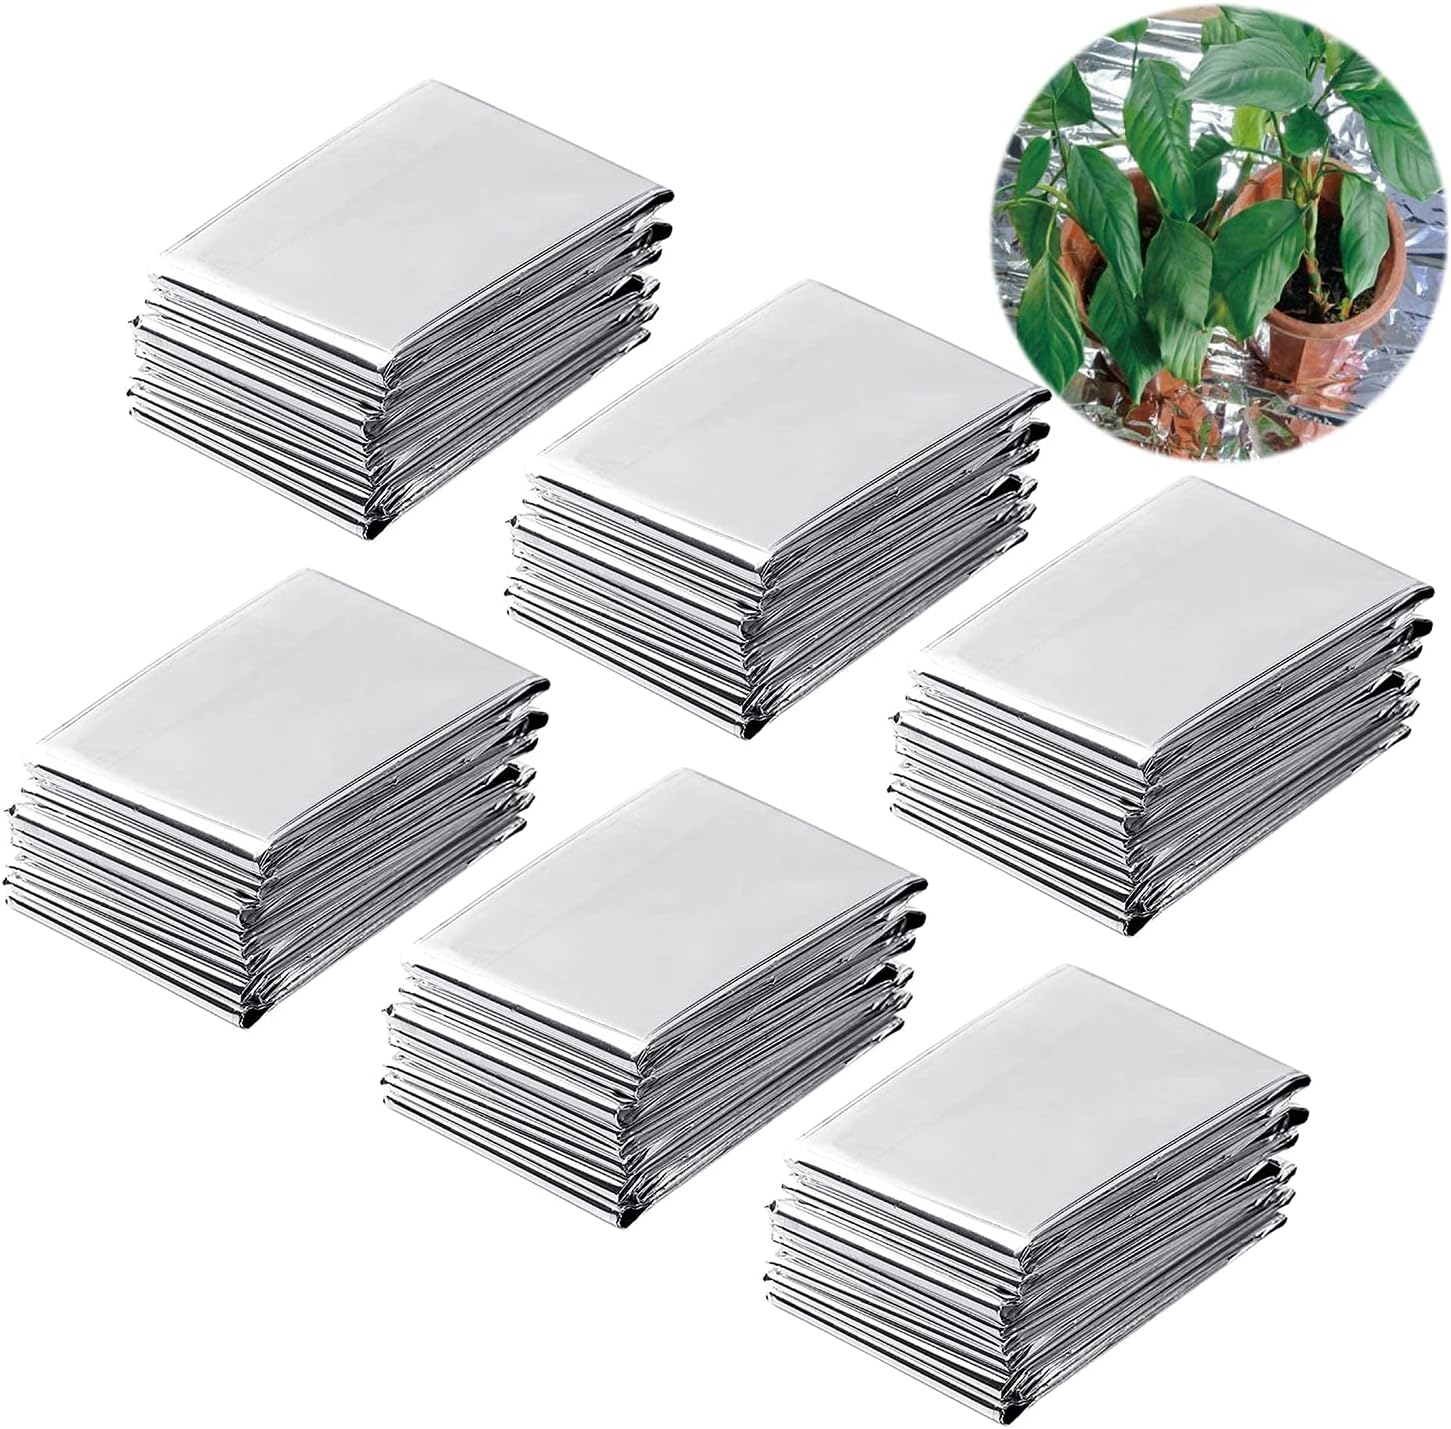 NAVAdeal 6 Pack Silver Highly Reflective Mylar Films, 82x 47Inch, Metallized Foil Covering Sheet, Garden Greenhouse Farming, Increase Plant Growth Save Power, Reduce Uneven Heat Environment Safe